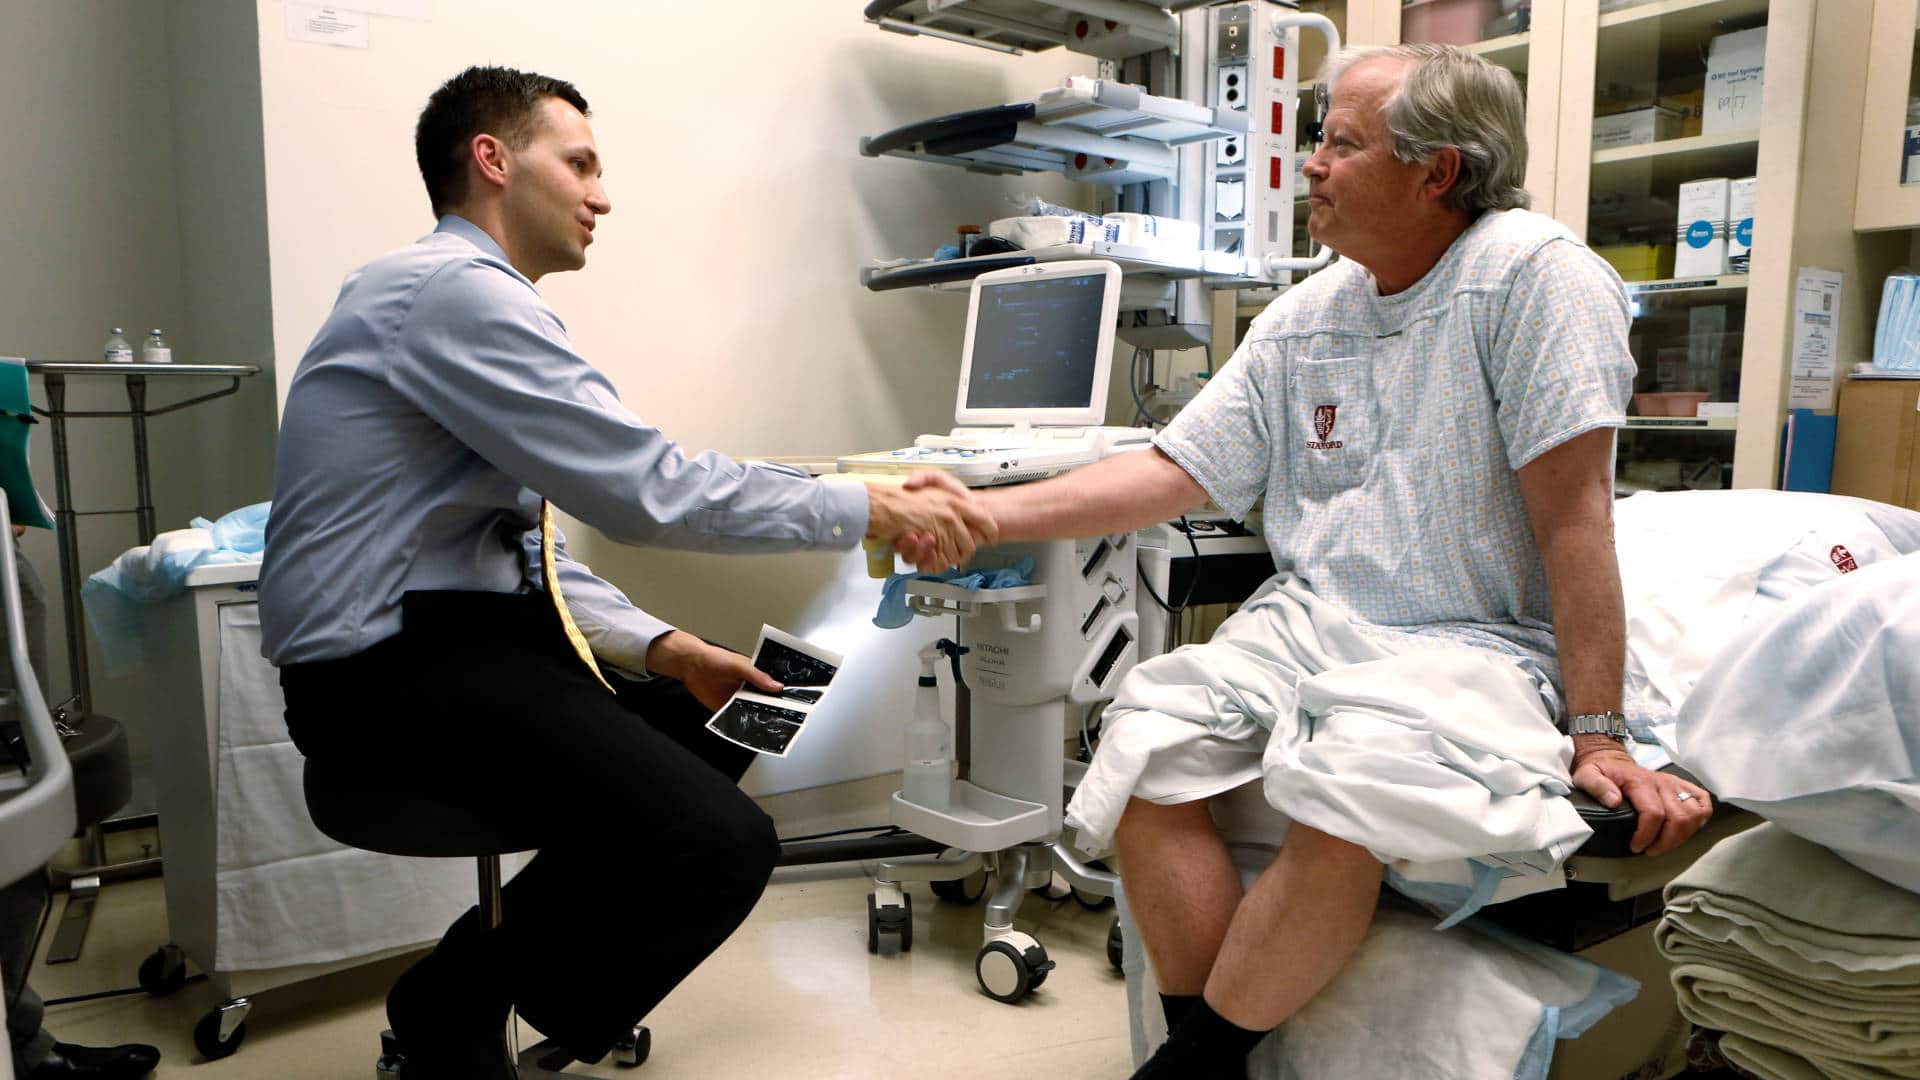 A patient thanks his oncologist after a prostate biopsy procedure.